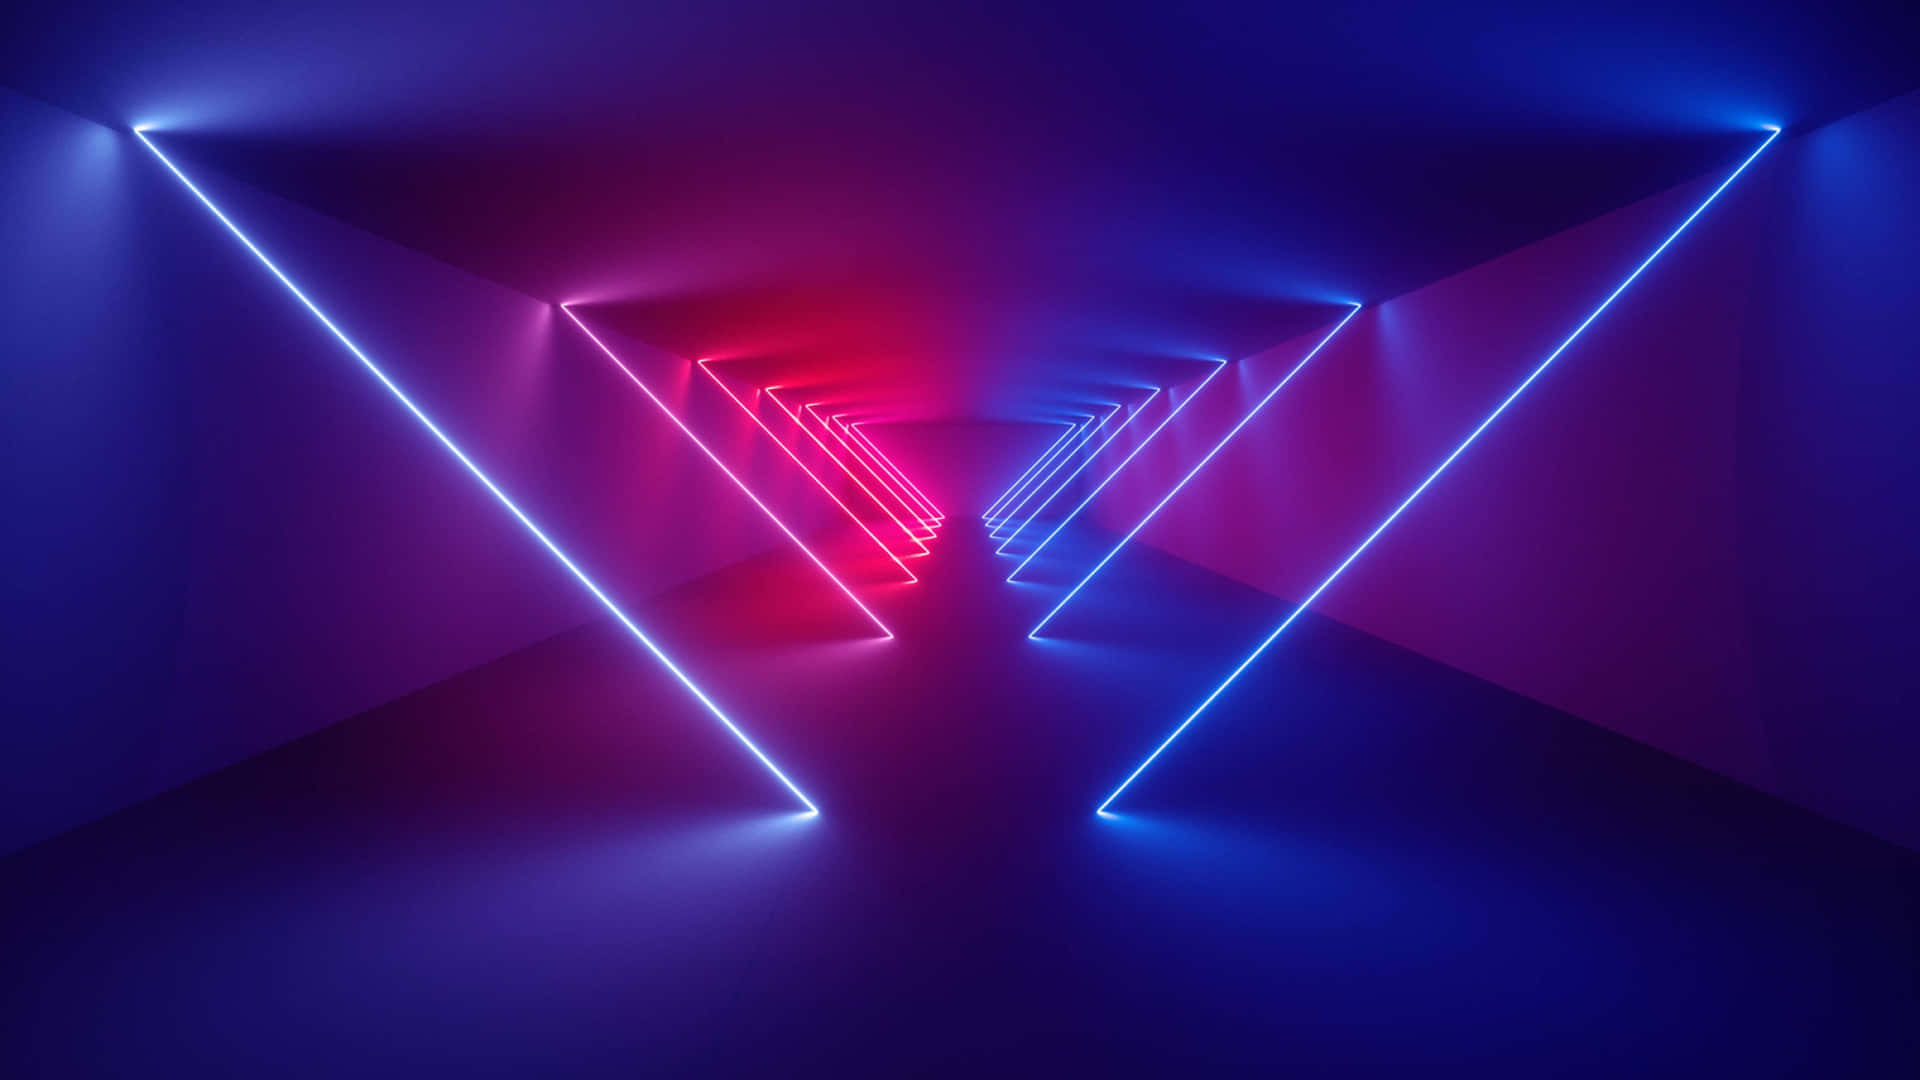 Vibrant Red and Deep Blue LEDs in Motion